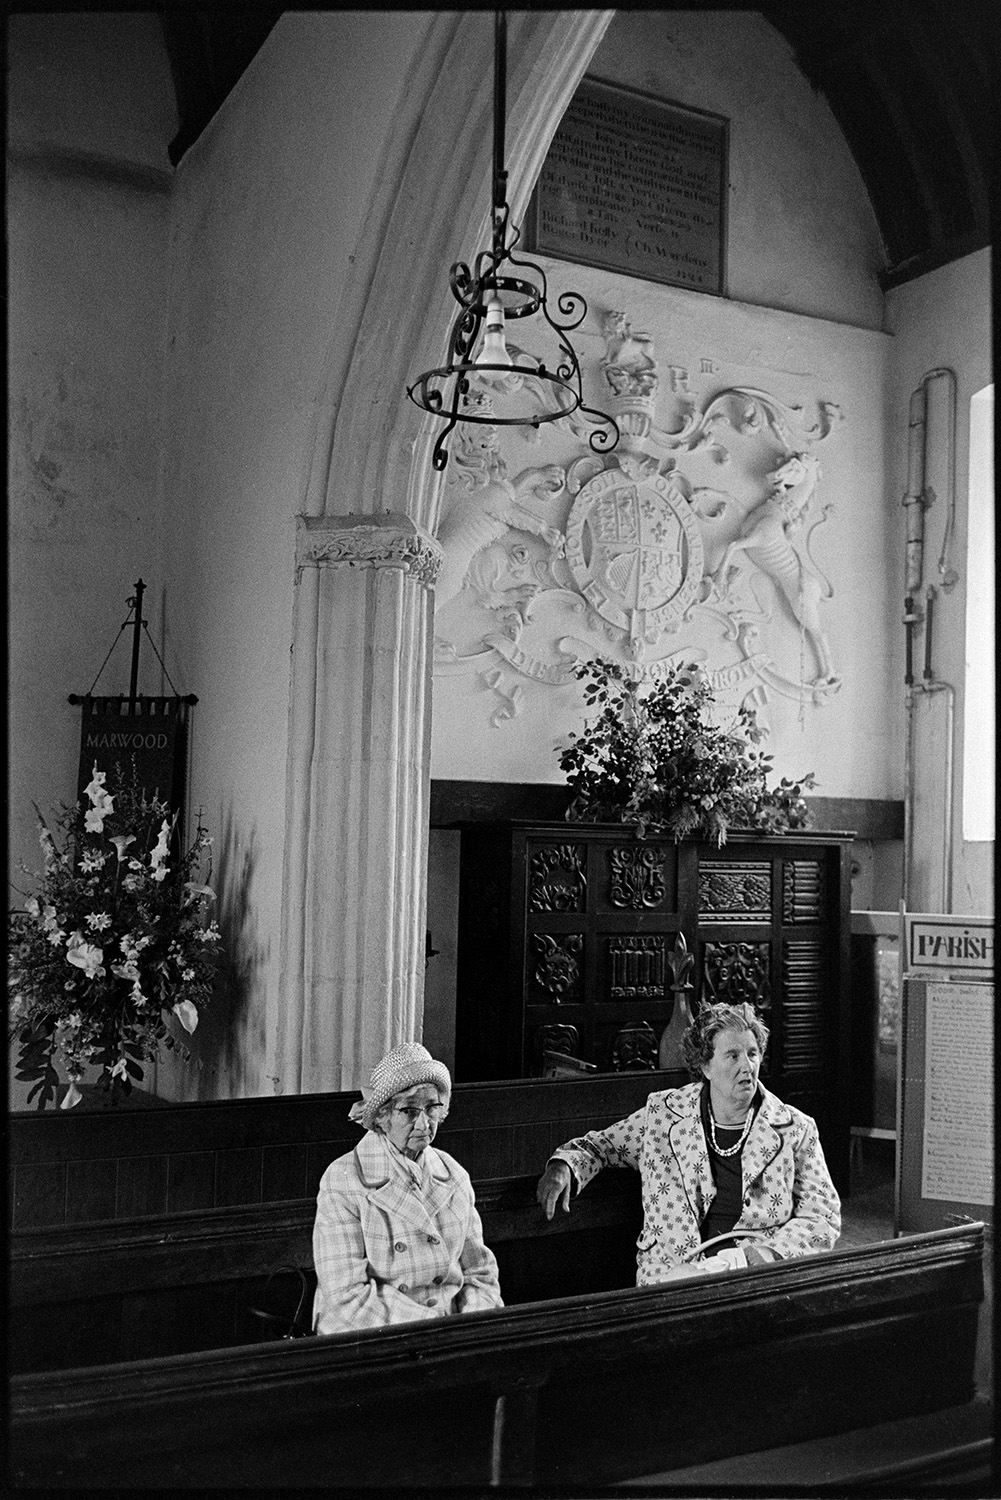 Two women in church looking at flower display. 
[Two women sat in the pews in Marwood Church looking at the Flower Show in the church. Two flower displays can be seen in the background.]